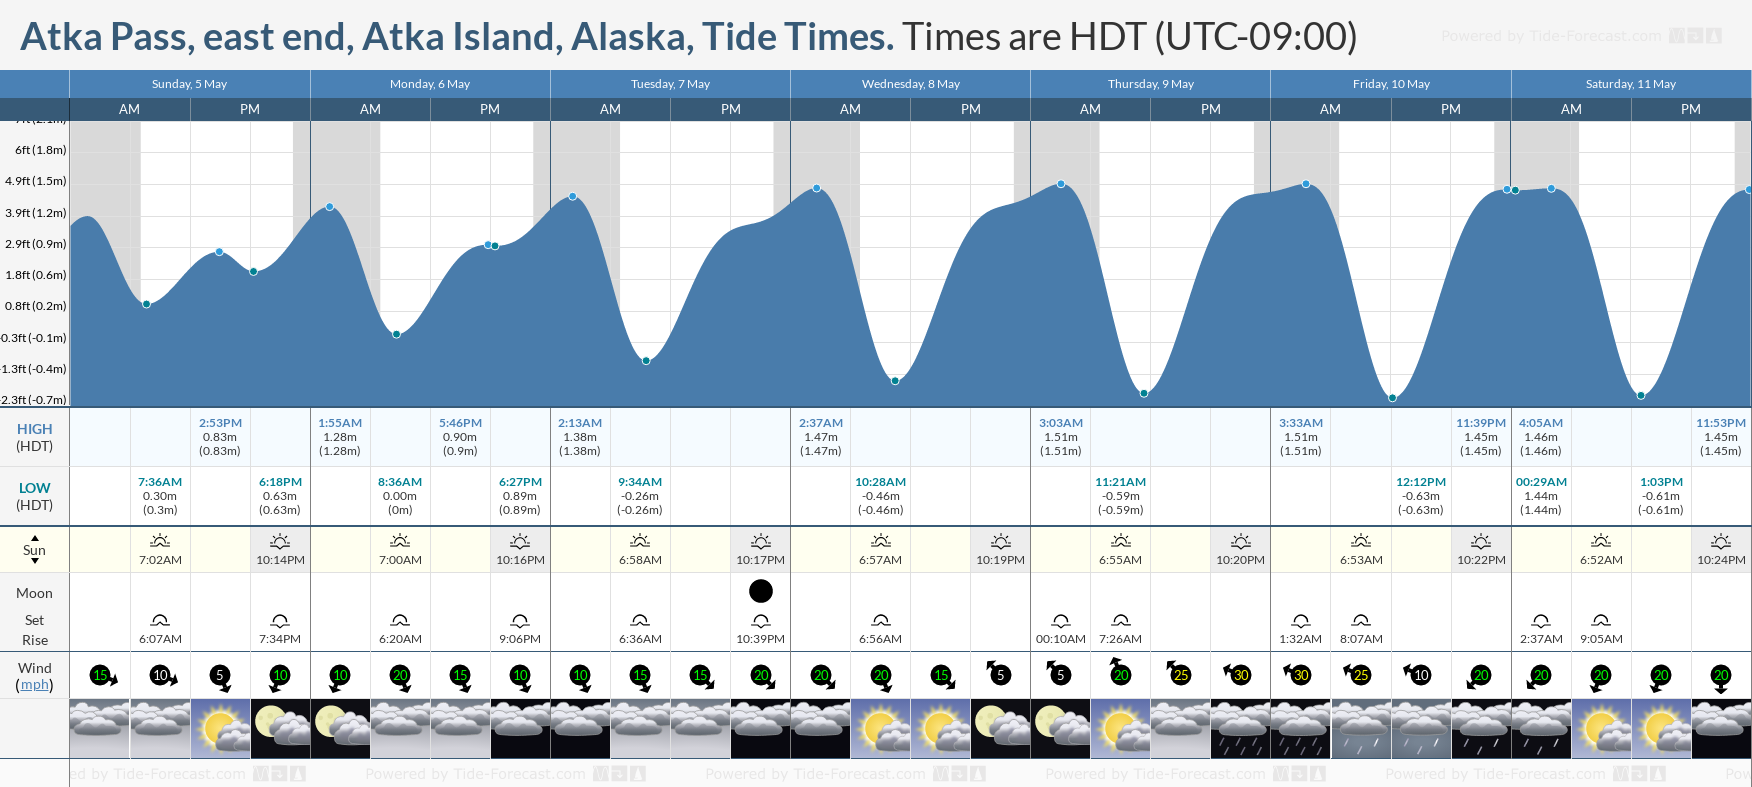 Atka Pass, east end, Atka Island, Alaska Tide Chart including high and low tide tide times for the next 7 days